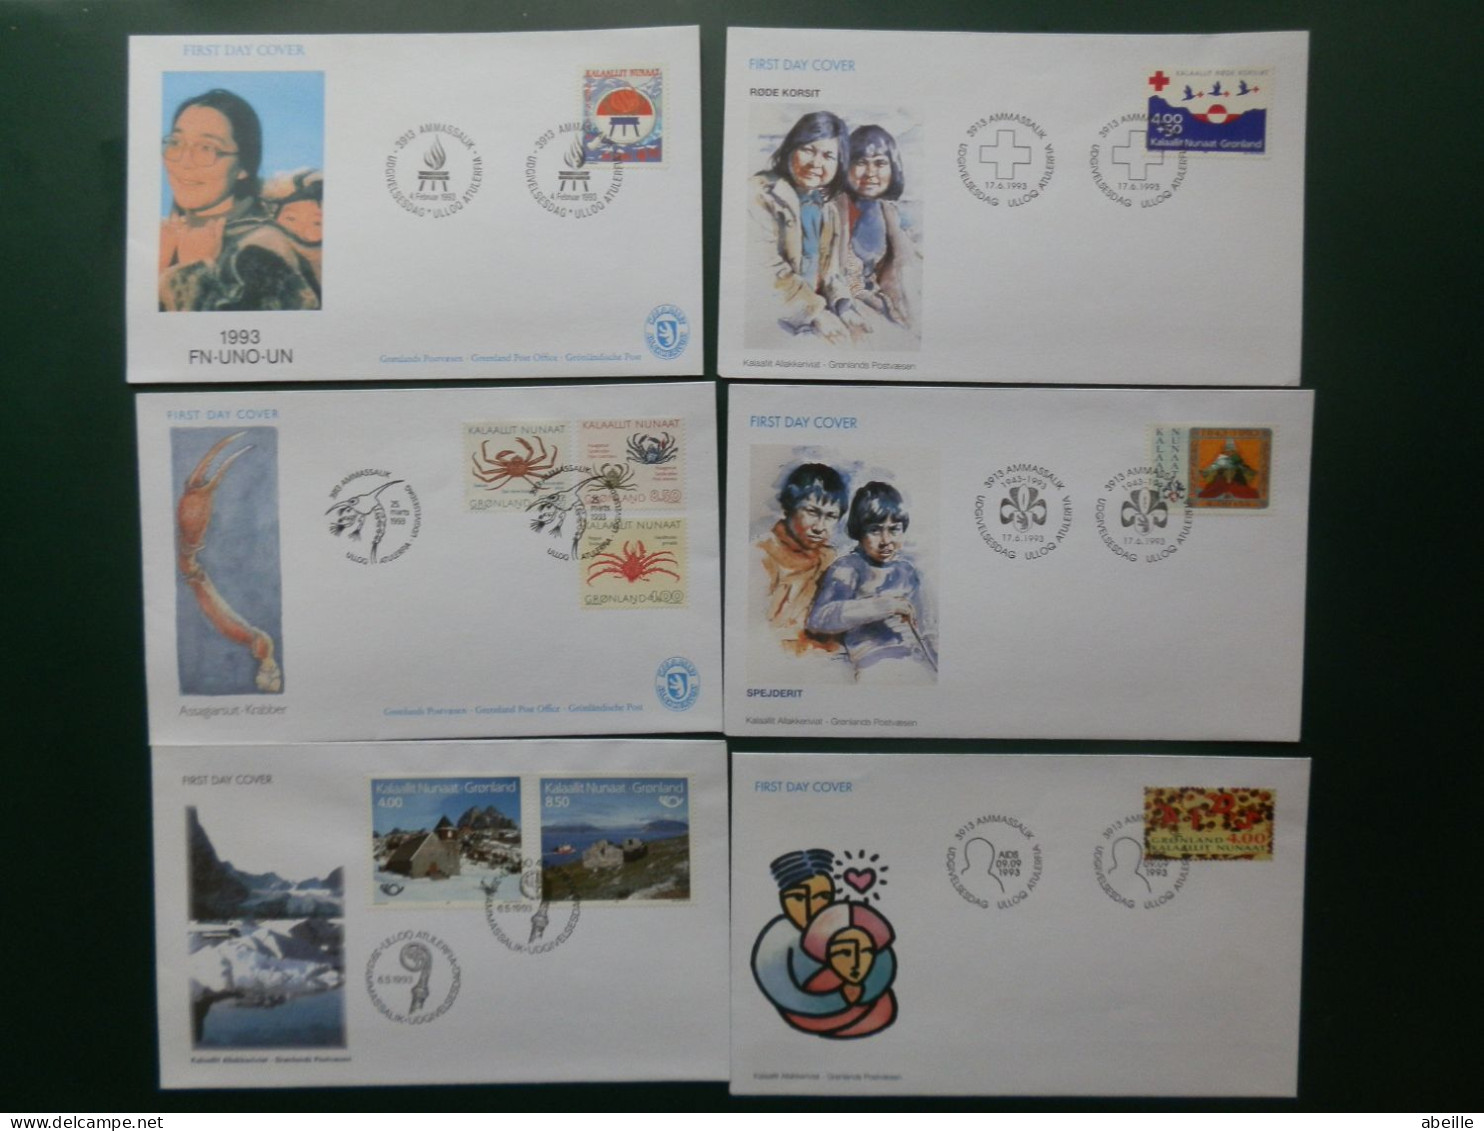 FDC GROENL./9 FDC GROENLAND ANNEE 1993 COTE YVERT TIMBRES 74.50 € NR. 218/230+BLOC 4 - FDC